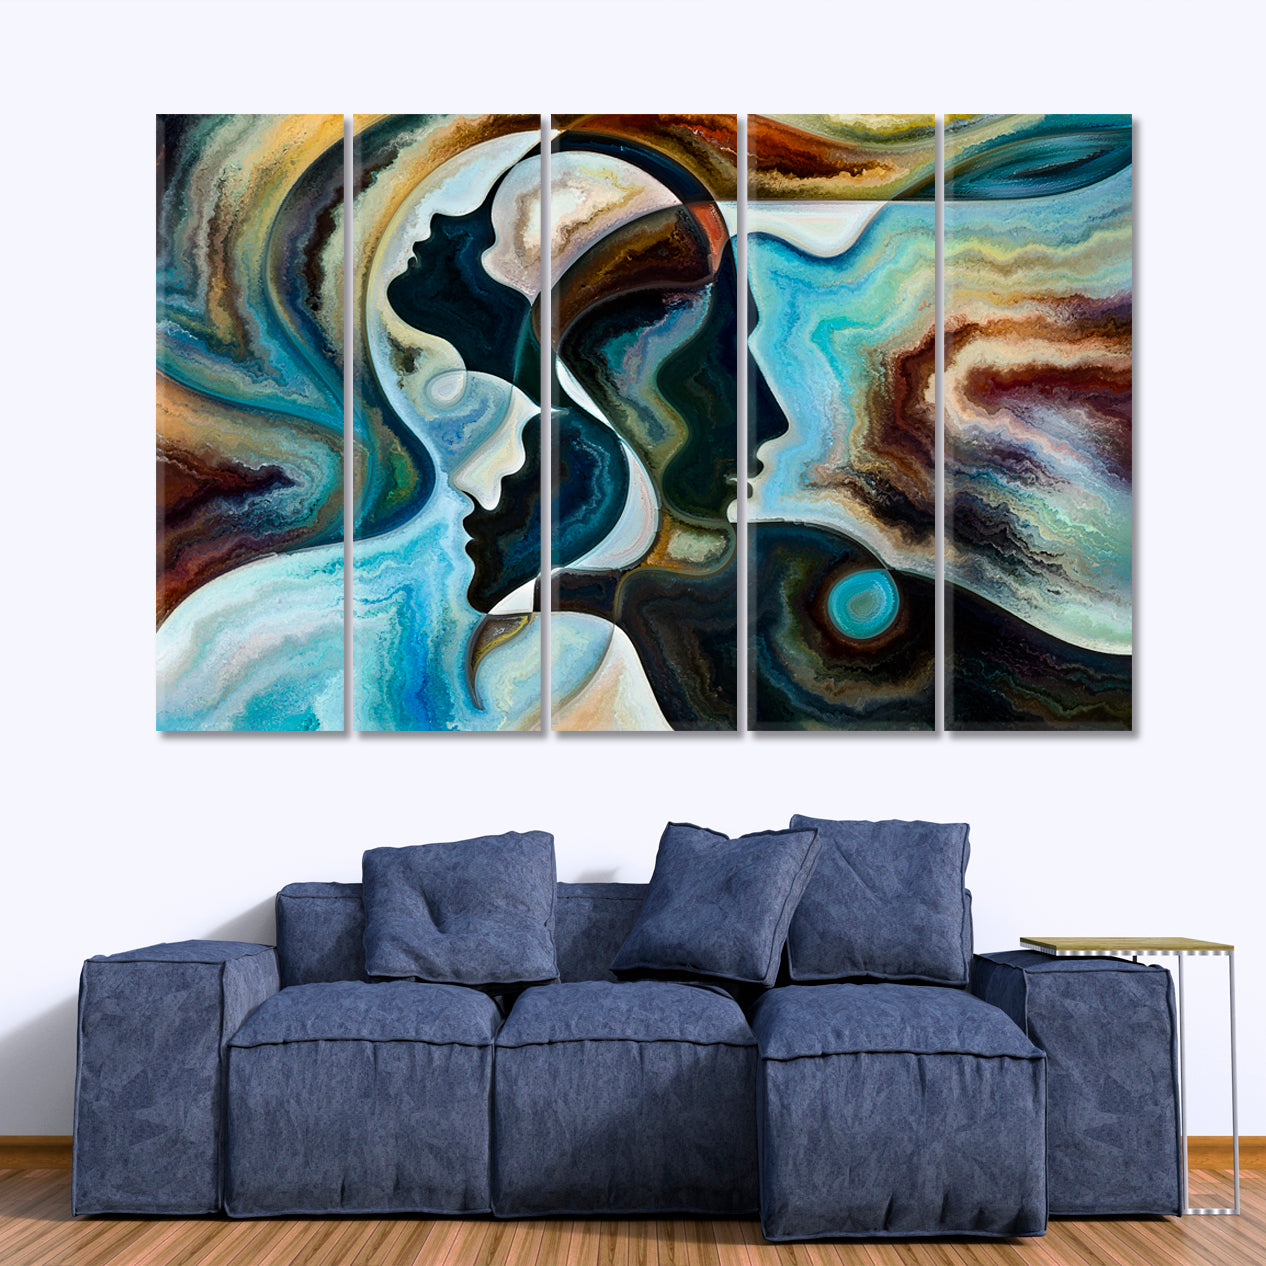 UNITY AND BIRTH OF LIFE Modern Abstract Painting Consciousness Art Artesty 5 panels 36" x 24" 